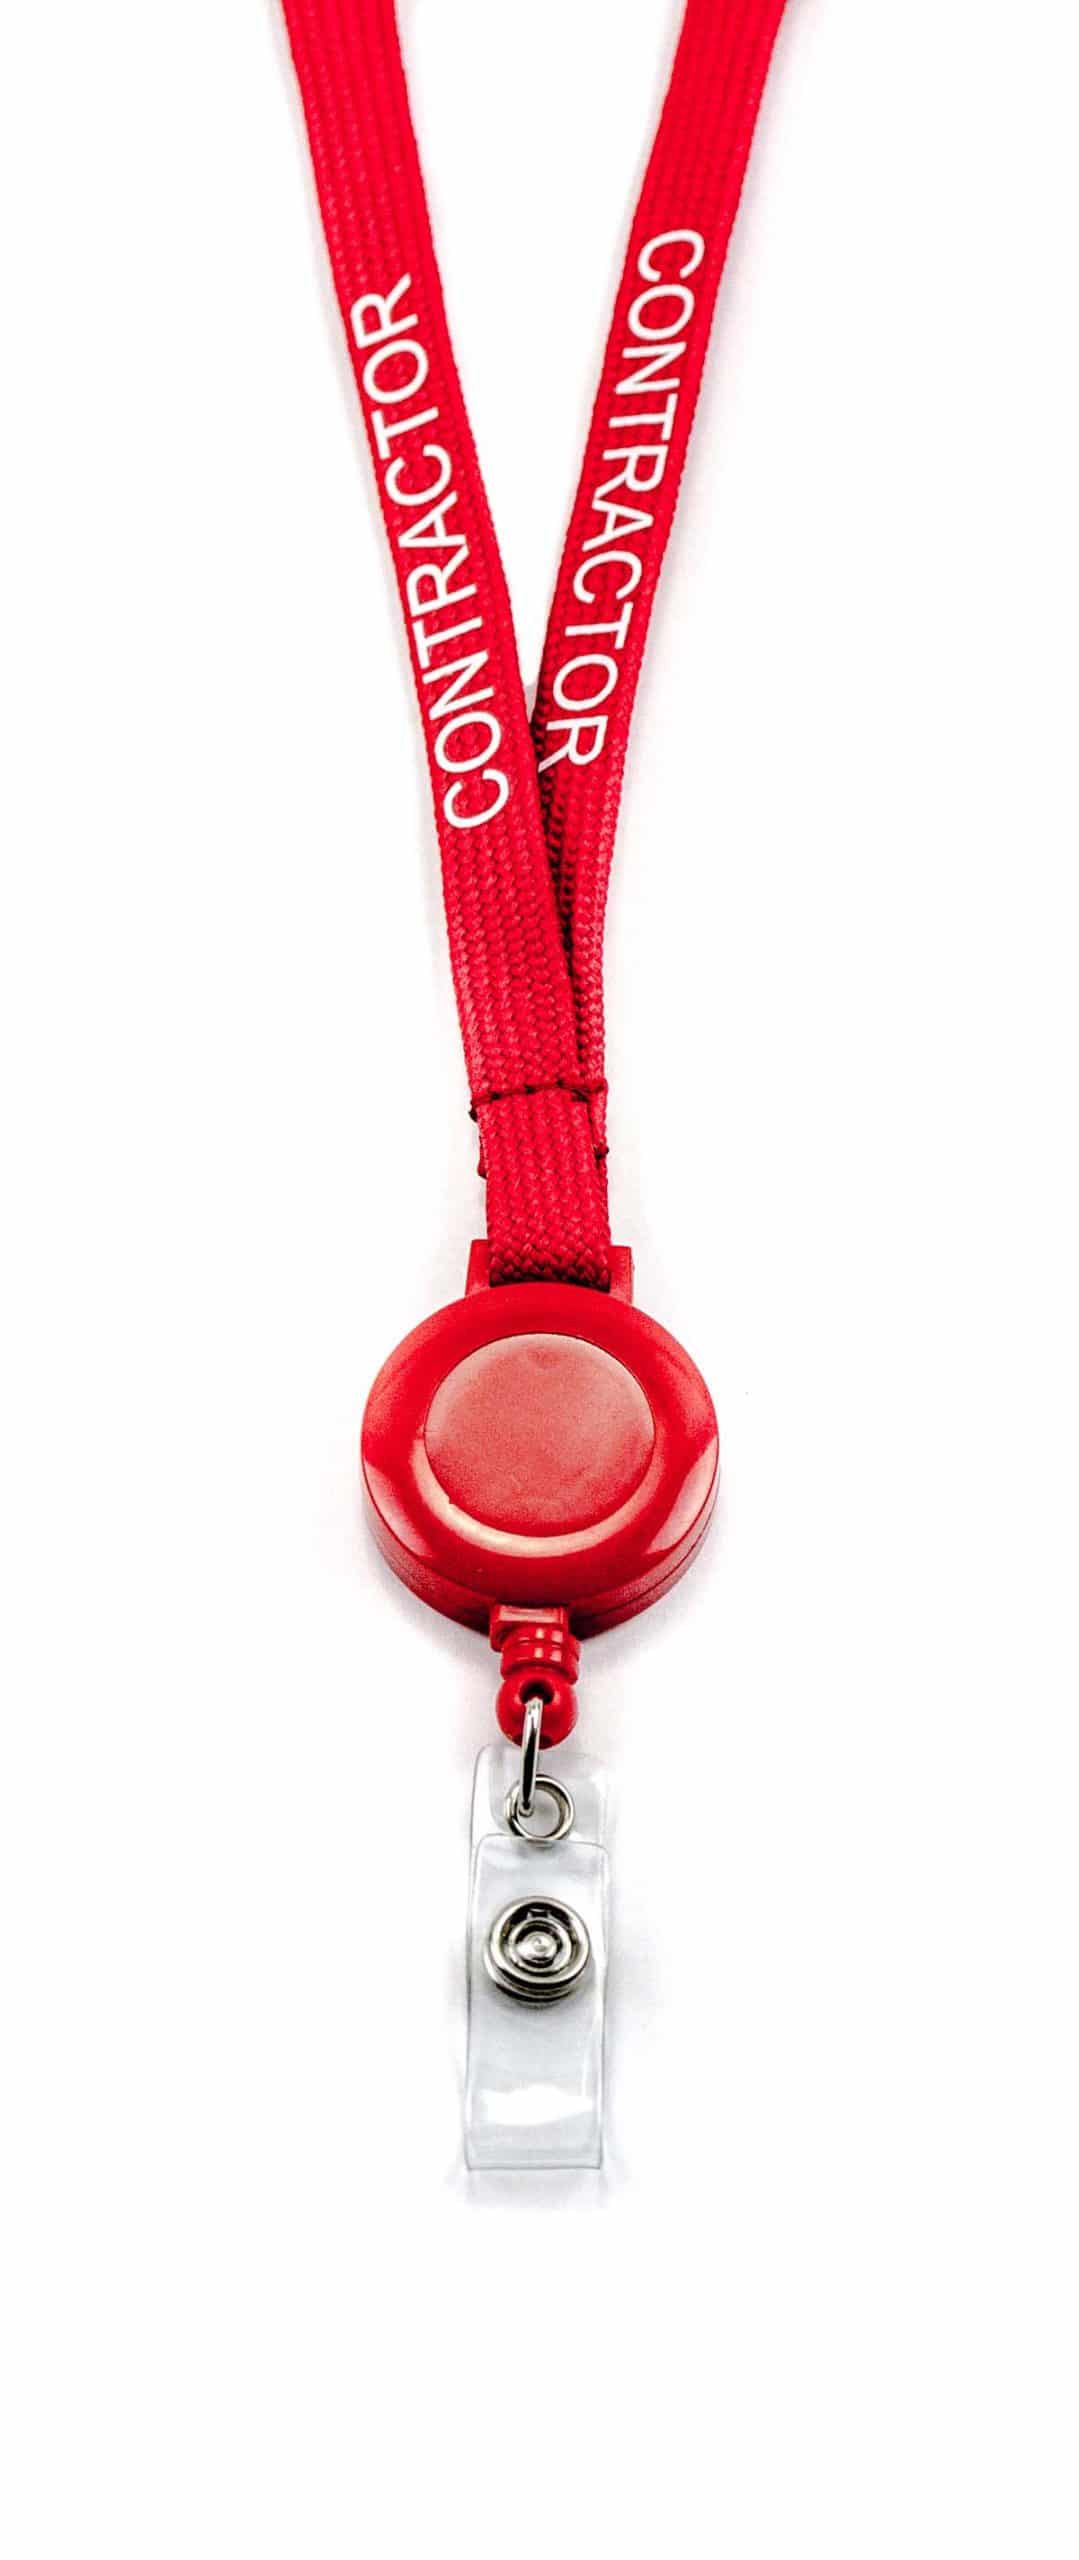 CONTRACTOR Economy Retractable Lanyard Lanyo in Red - Red